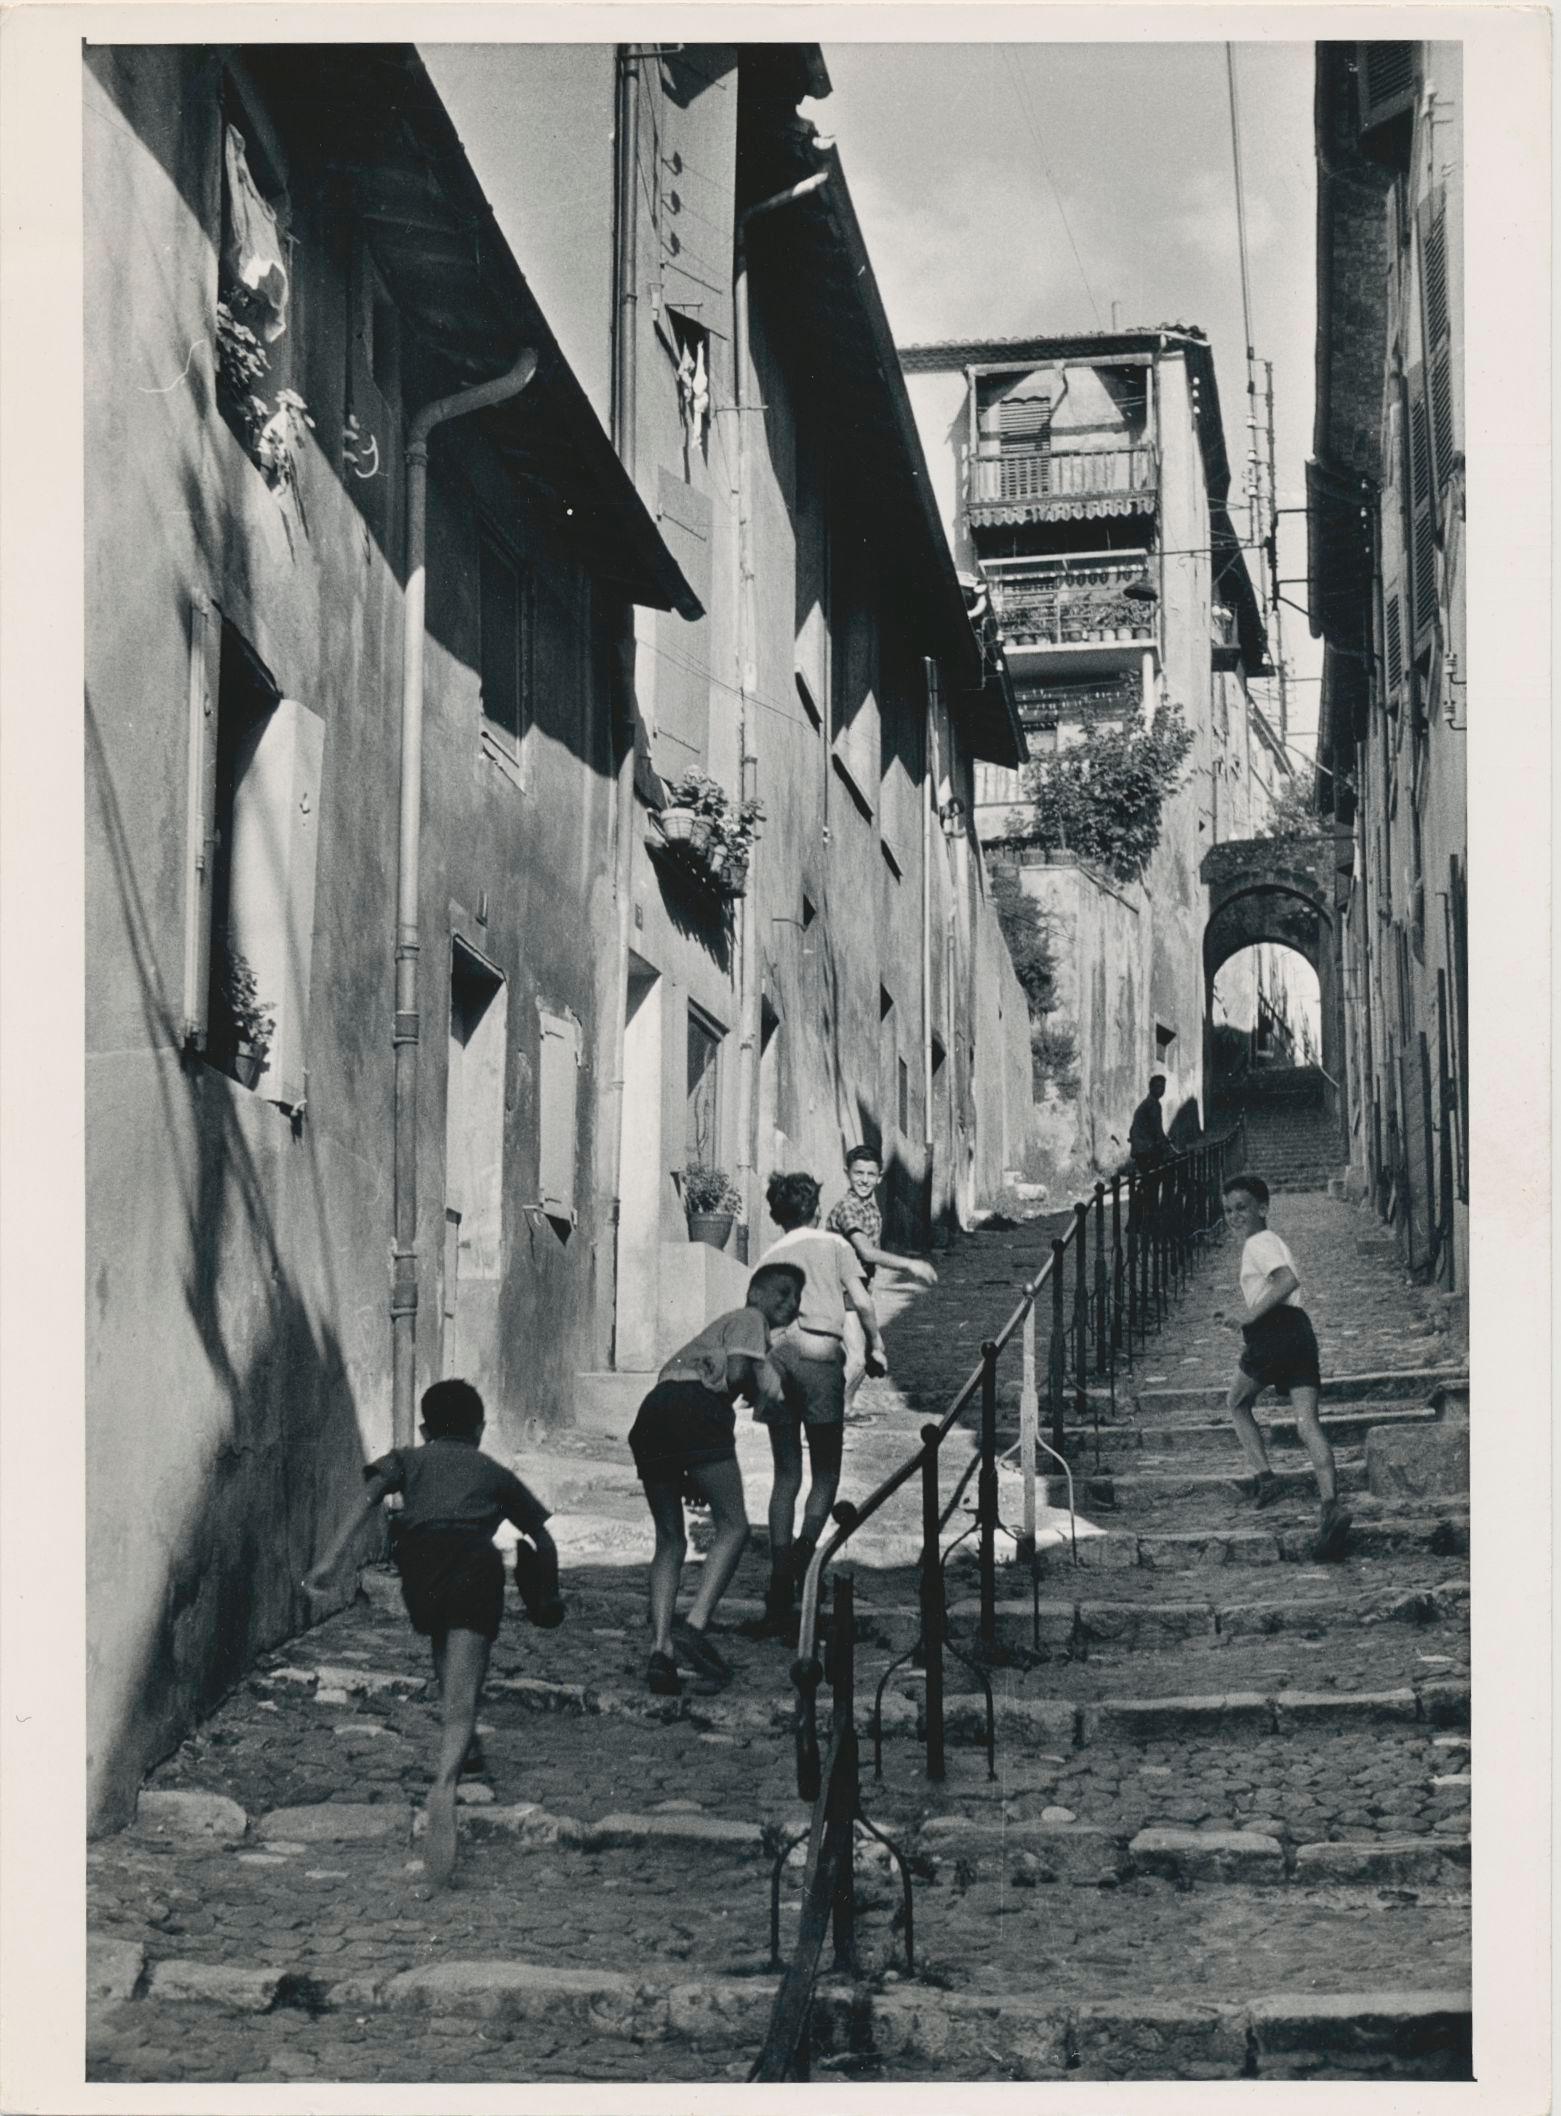 Erich Andres Black and White Photograph - Stairs, Street Photography, Black and White, France 1950s, 17, 9 x 13 cm